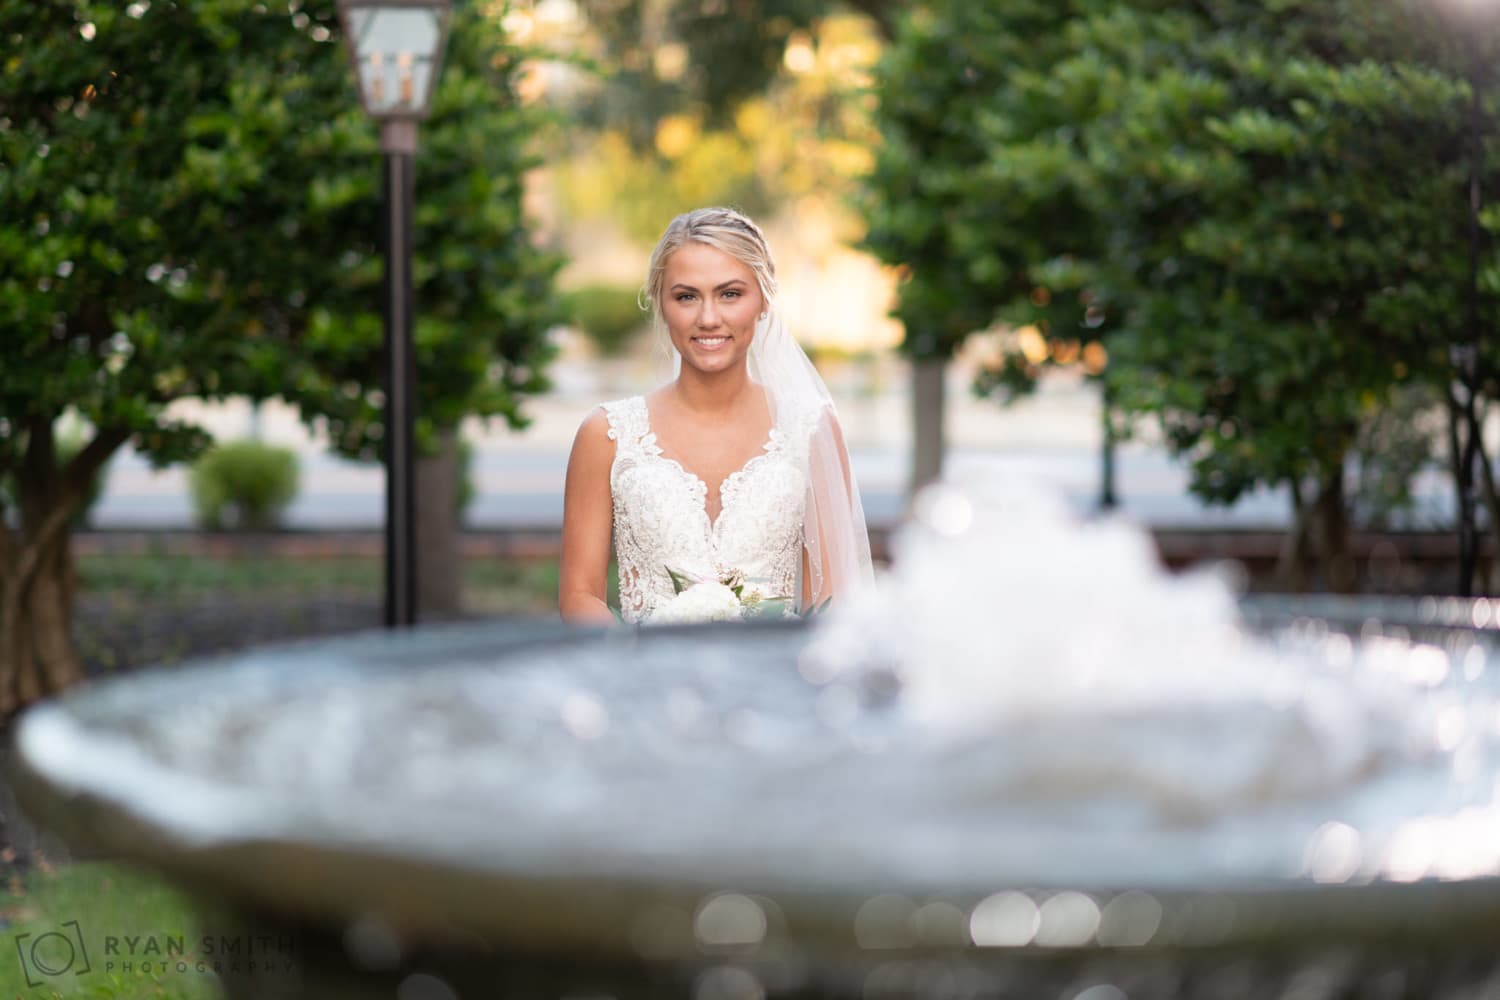 Portrait behind the courthouse fountain - Conway River Walk